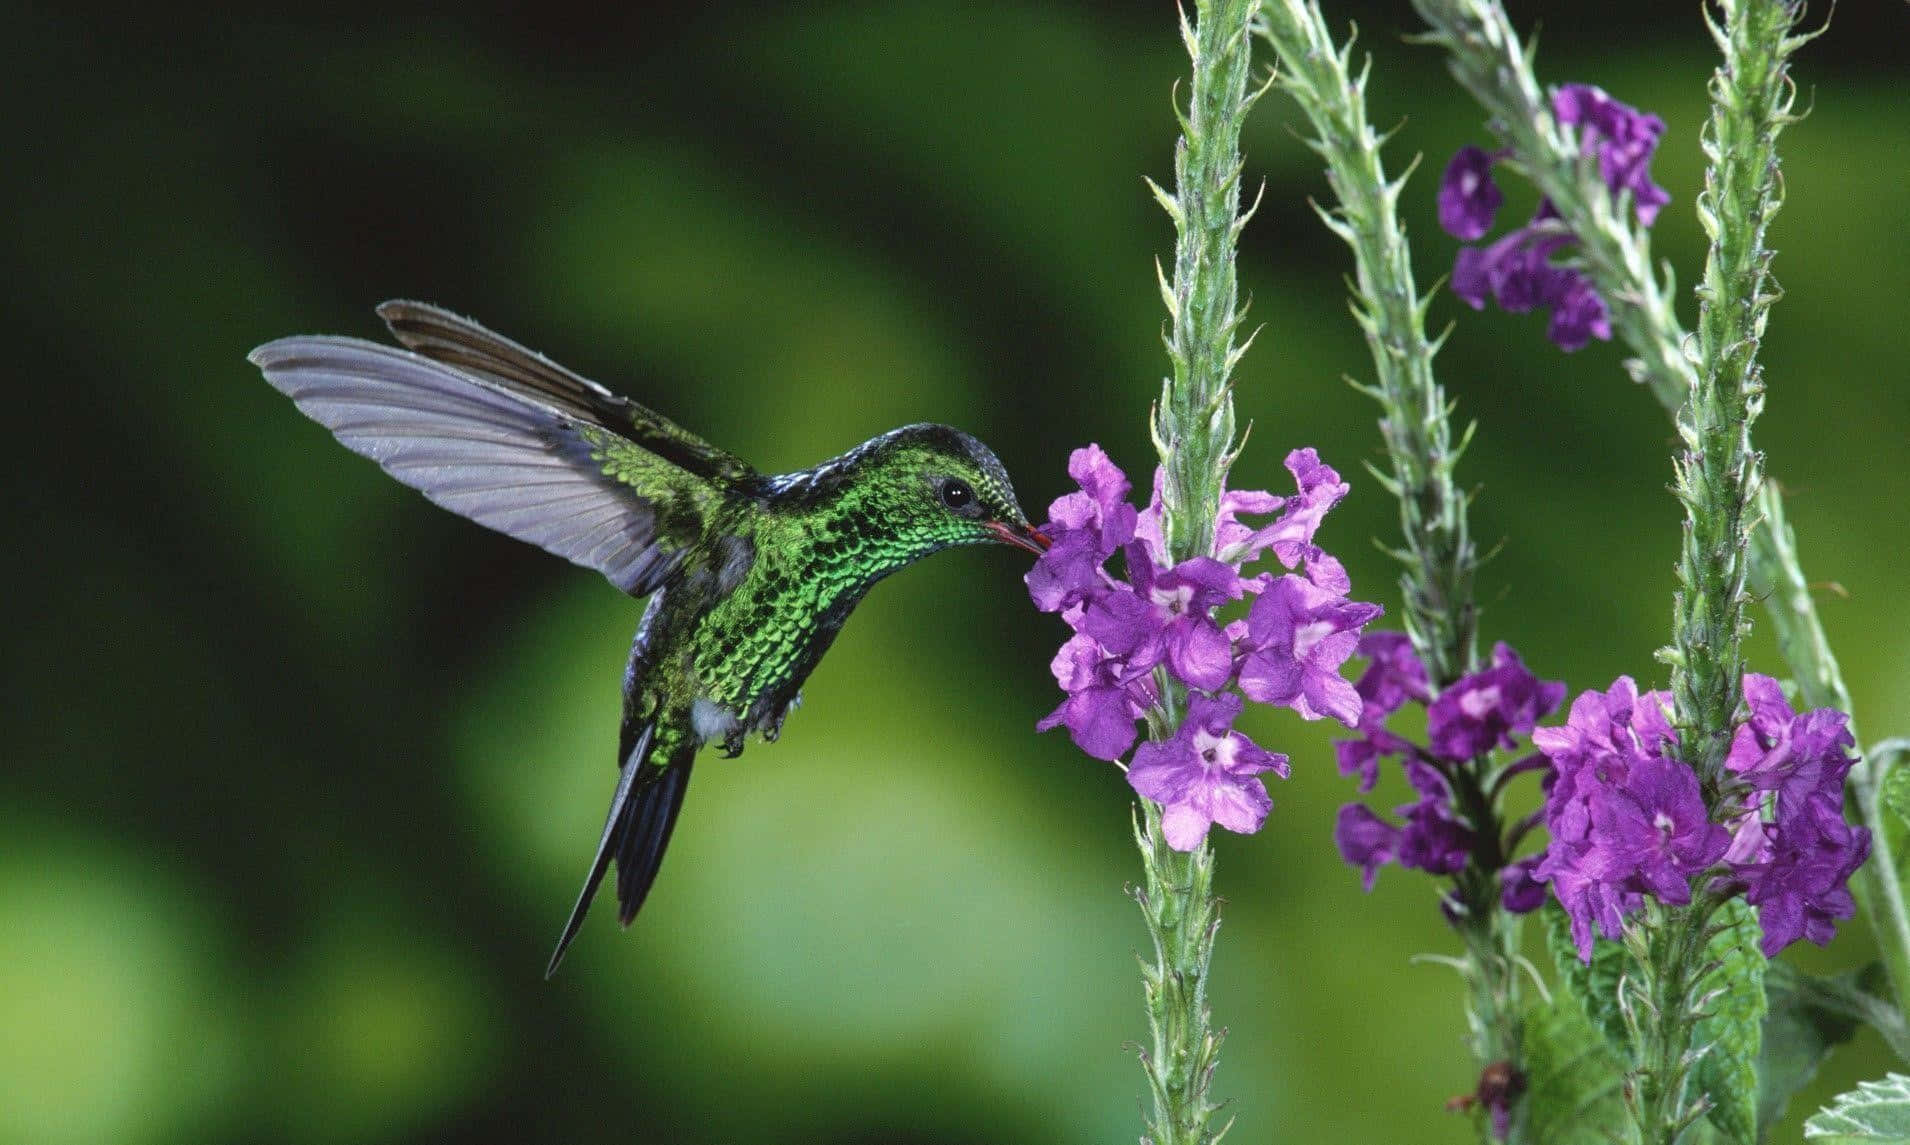 "A beautiful hummingbird enjoys a lovely day among the flowers."